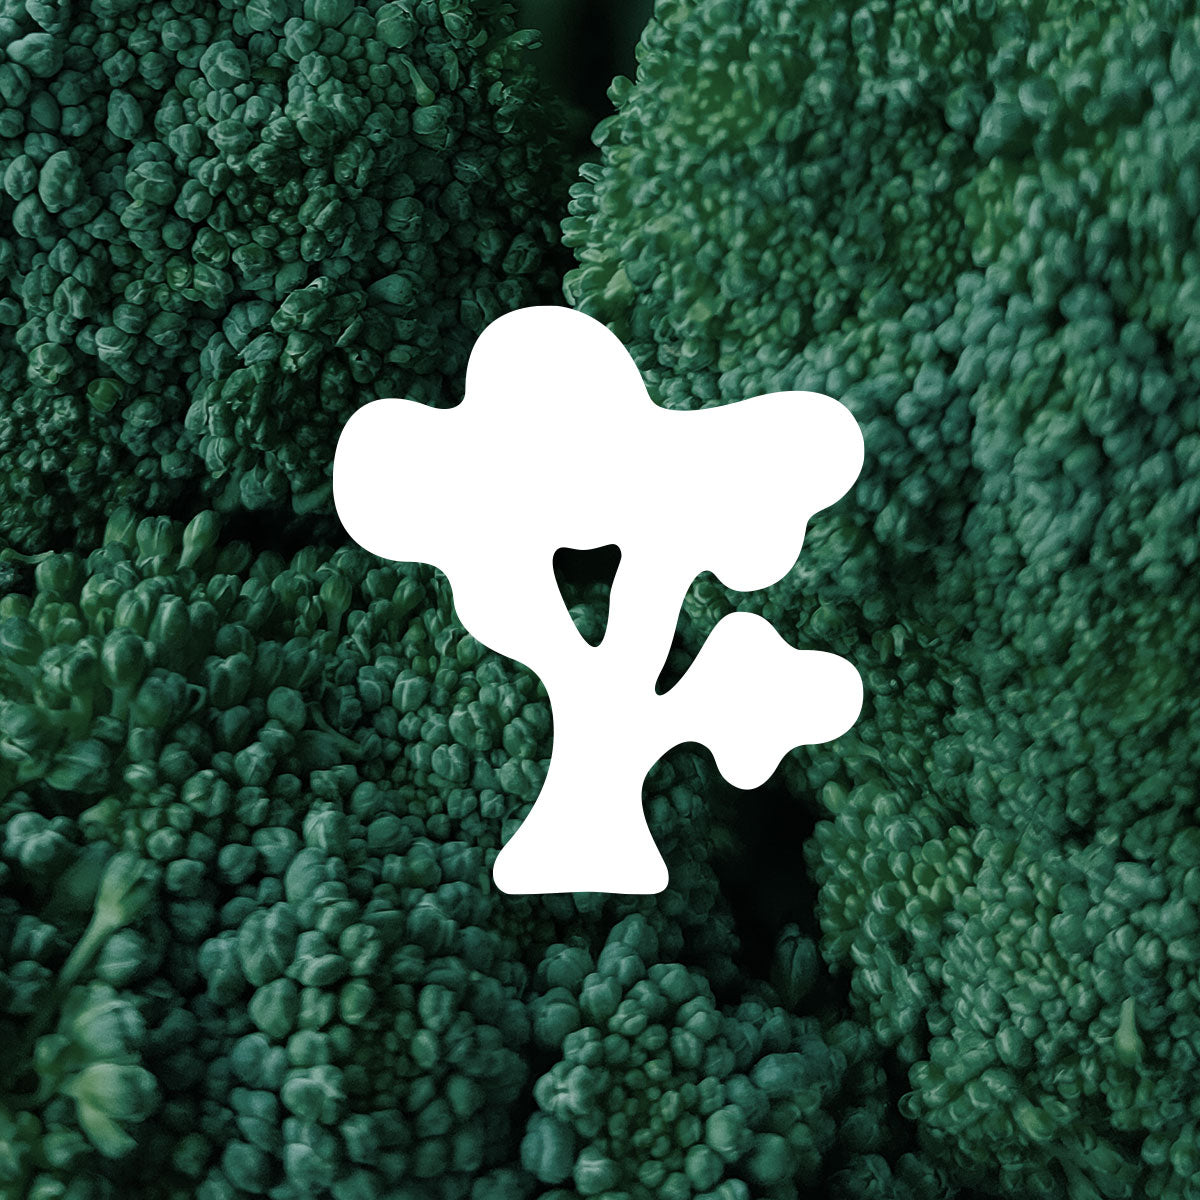 Clover broccoli illustration shown with photo of broccoli florets